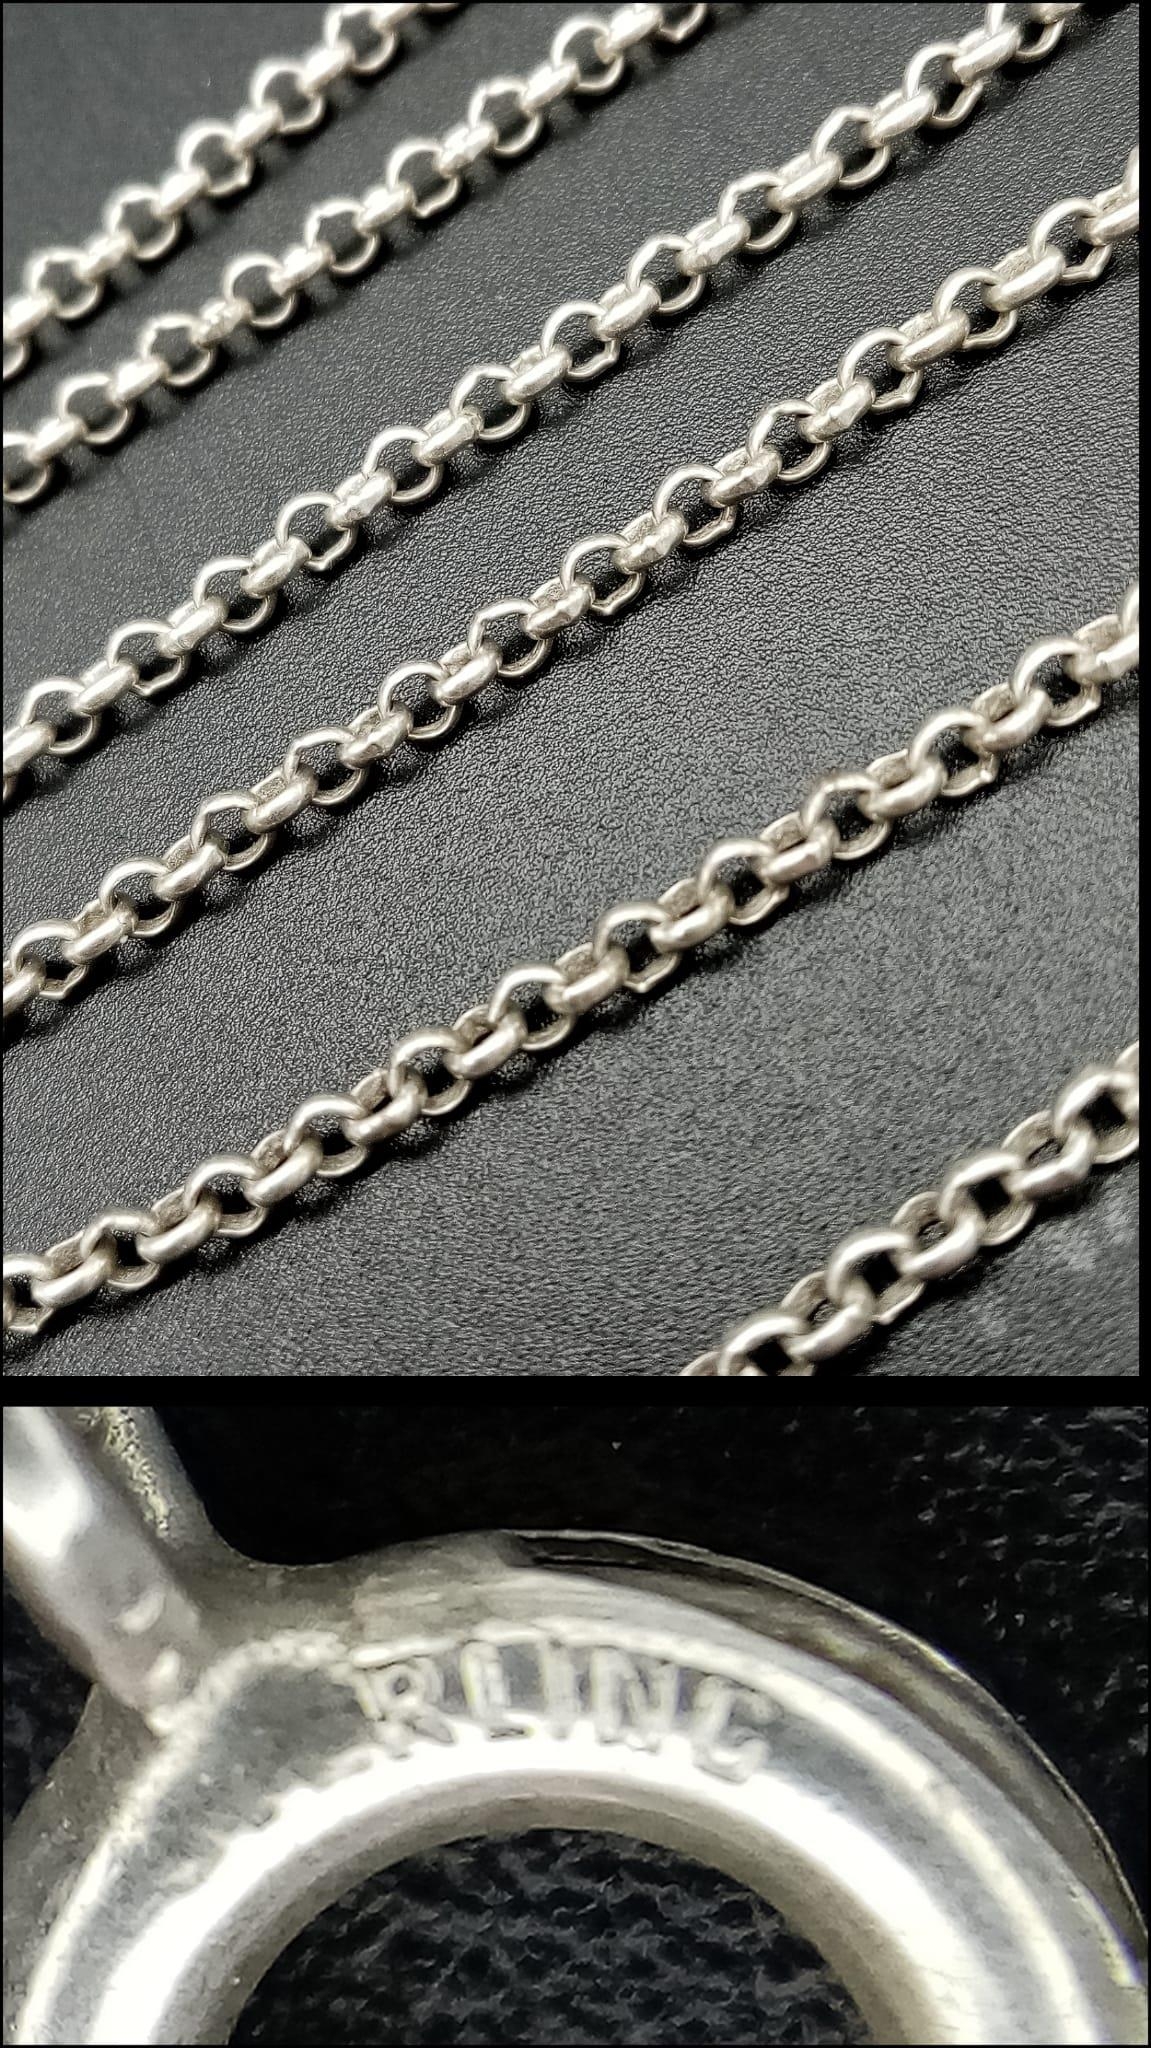 Four Sterling Silver Necklaces. Different lengths and styles, 23.2g total weight. - Image 3 of 6